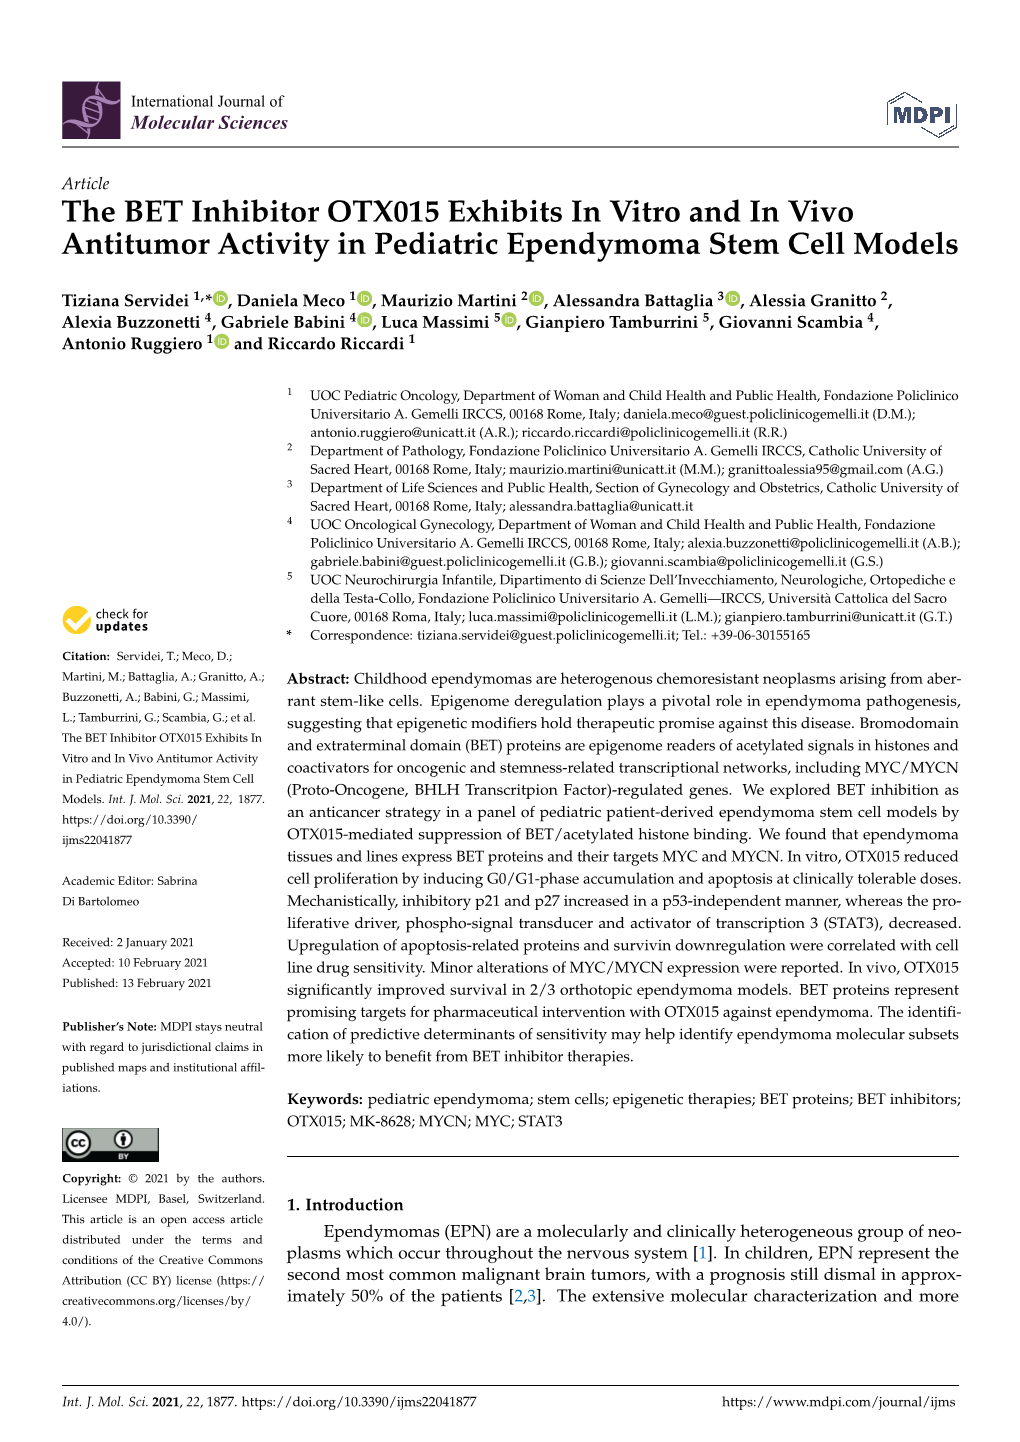 The BET Inhibitor OTX015 Exhibits in Vitro and in Vivo Antitumor Activity in Pediatric Ependymoma Stem Cell Models